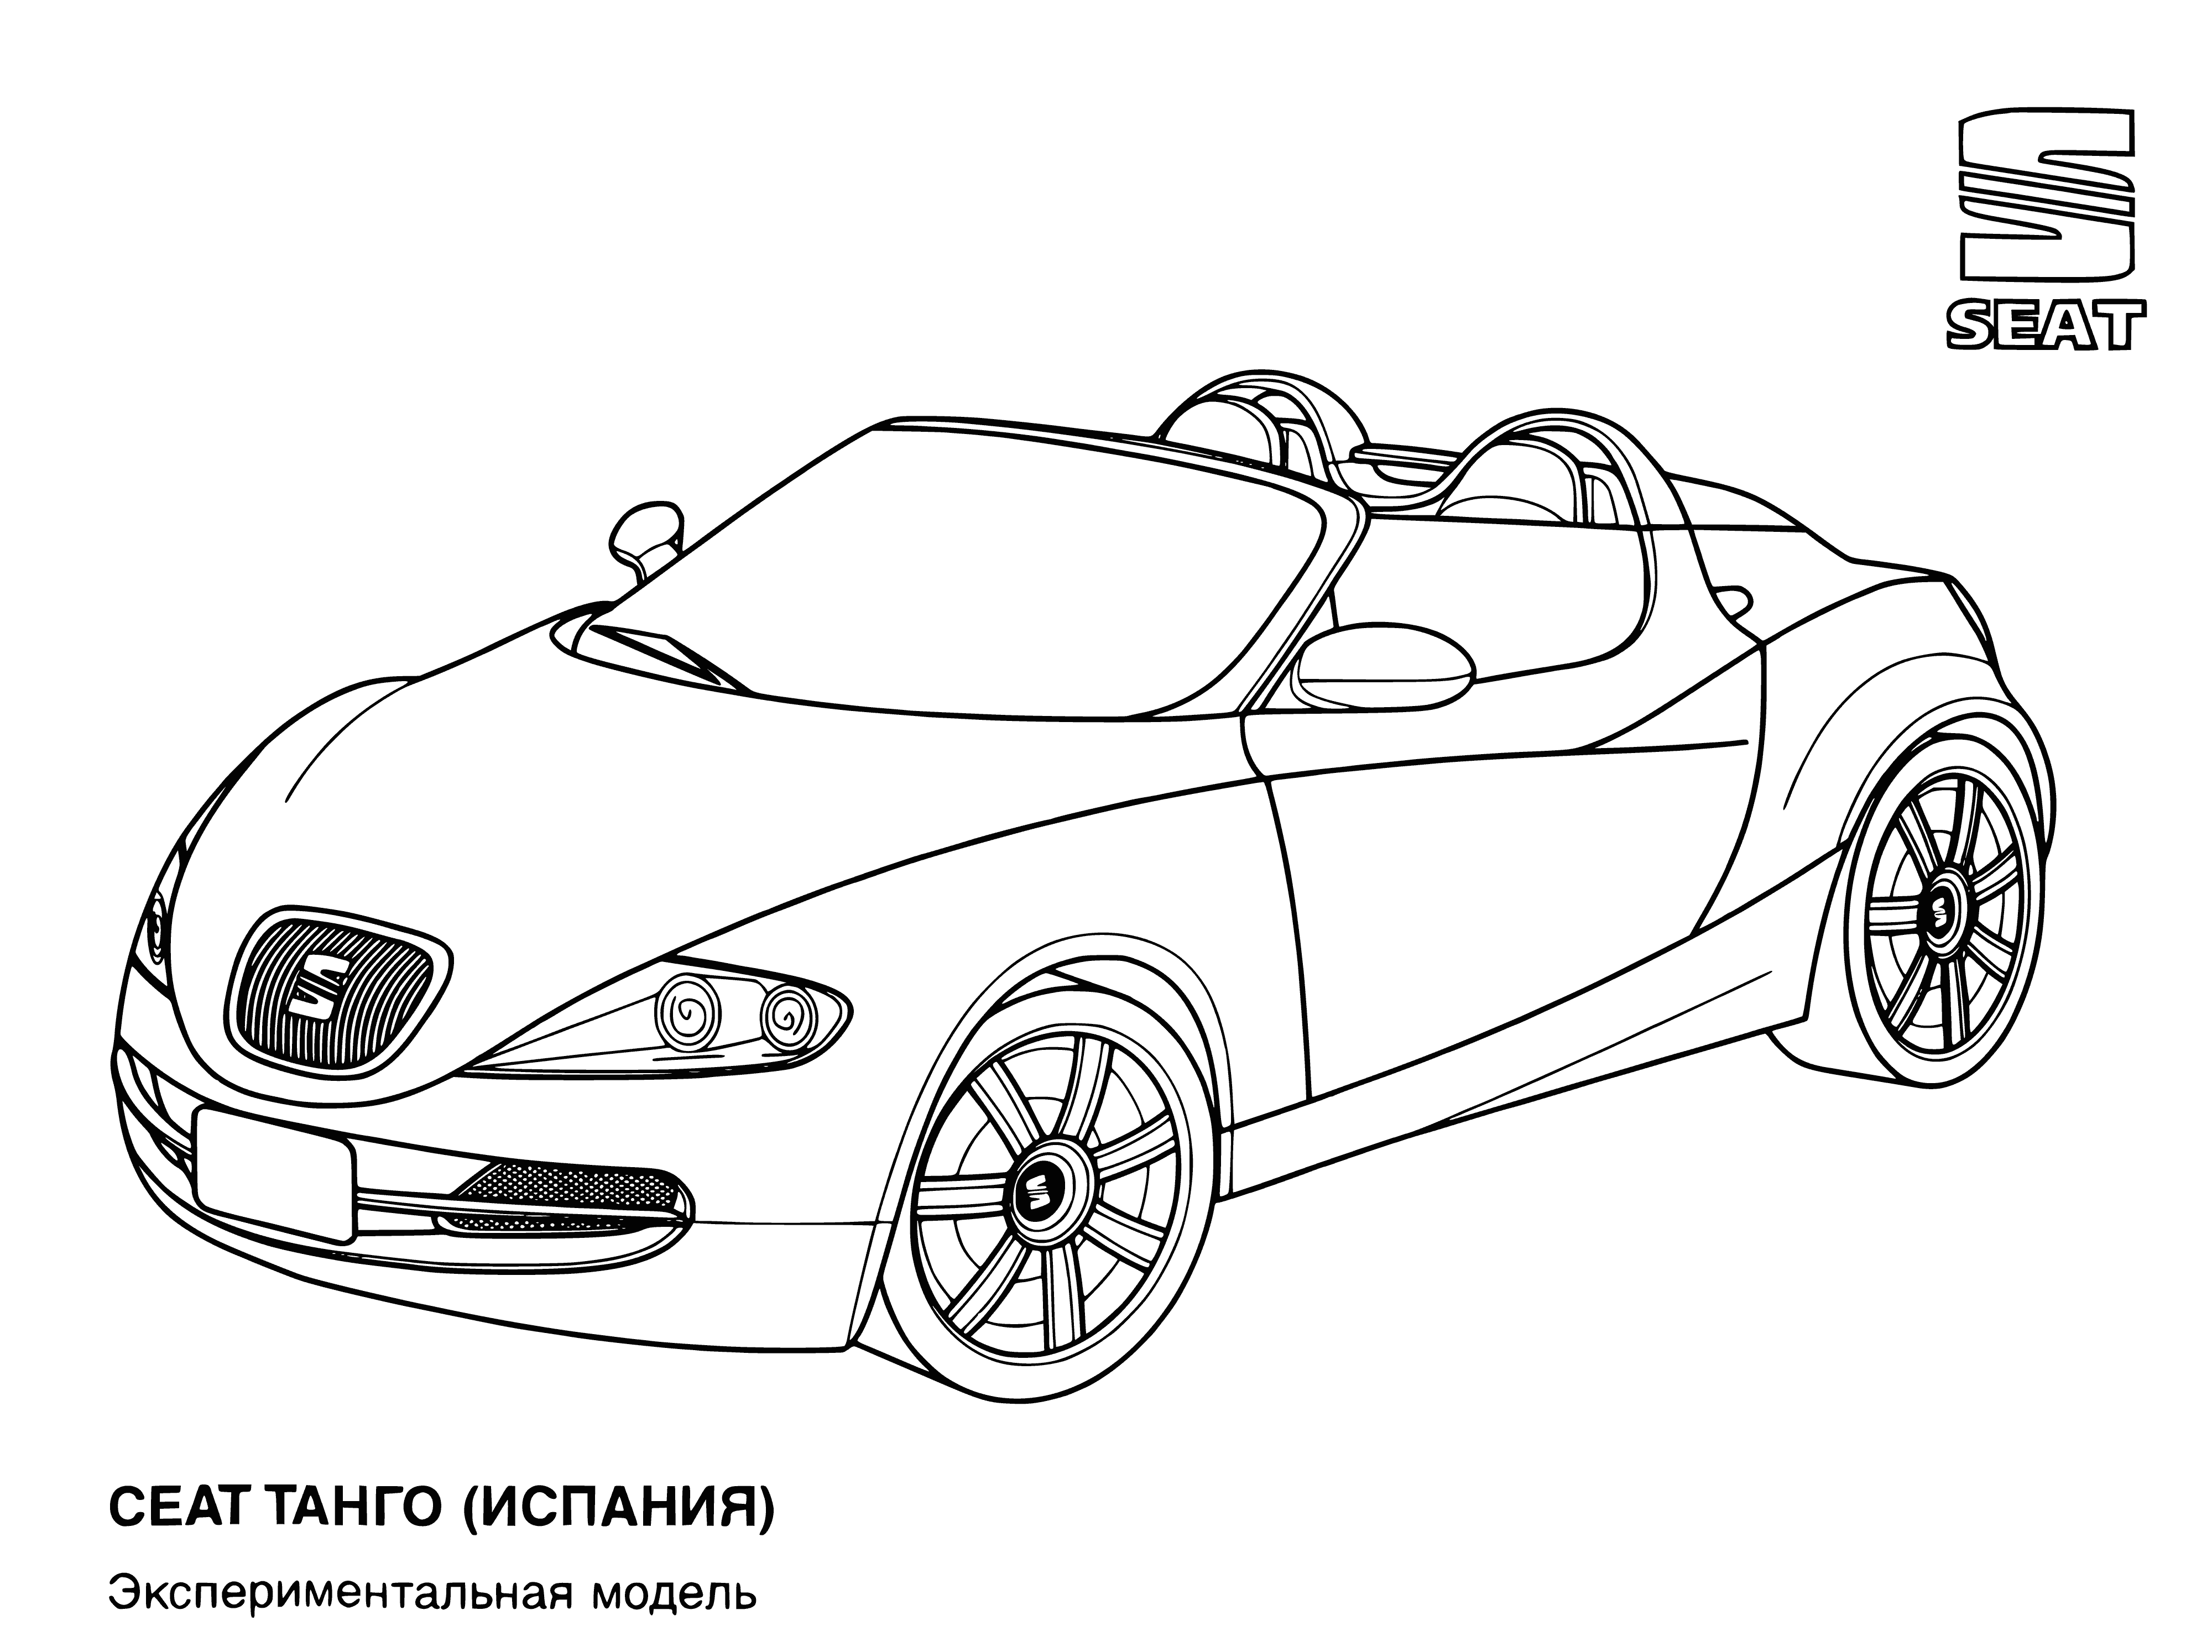 Seat (Spain) coloring page